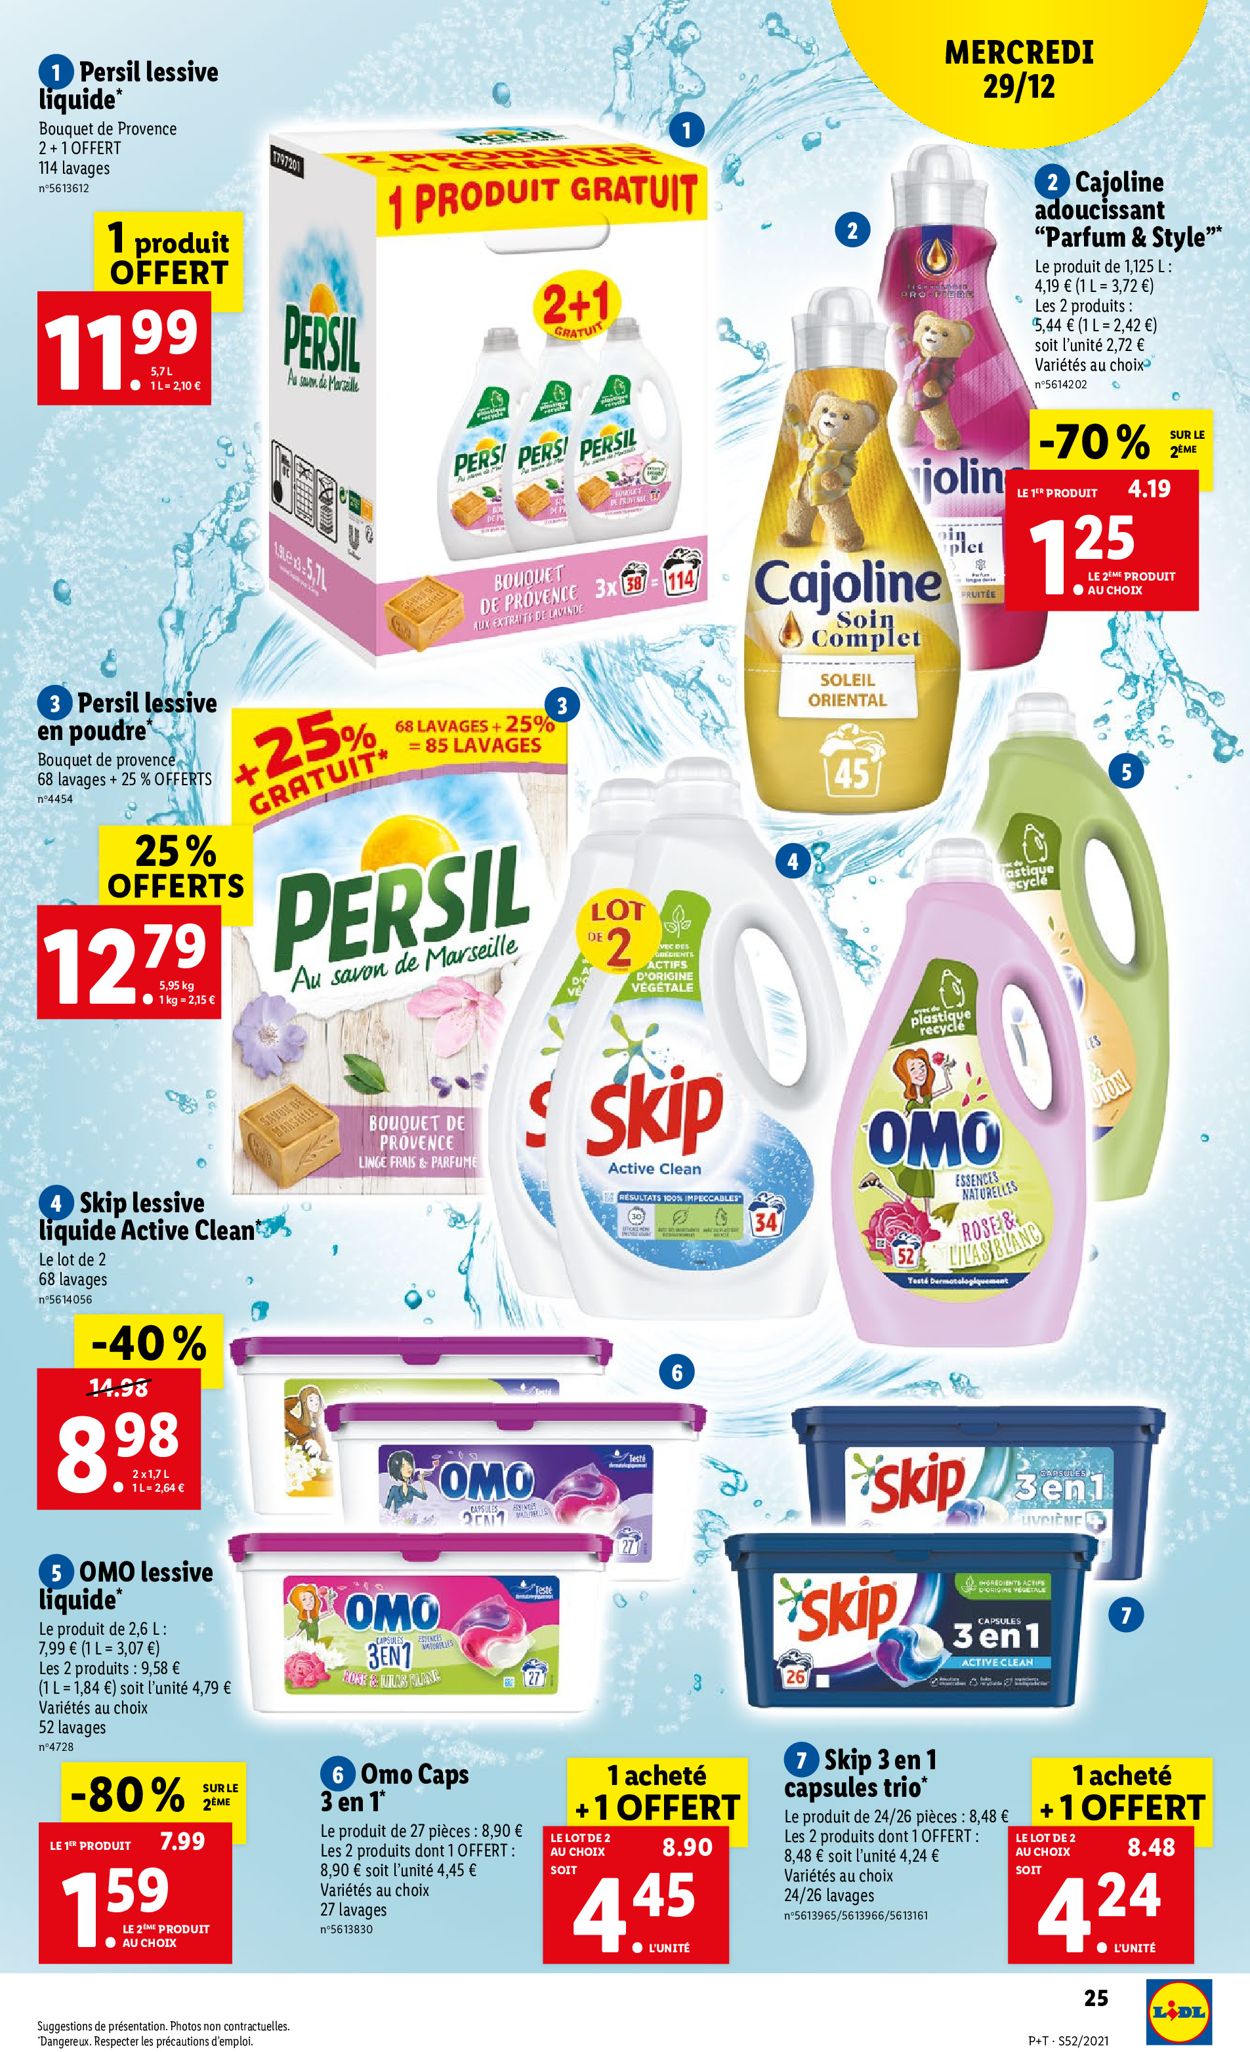 Lidl Catalogue - 29.12-04.01.2022 (Page 25)